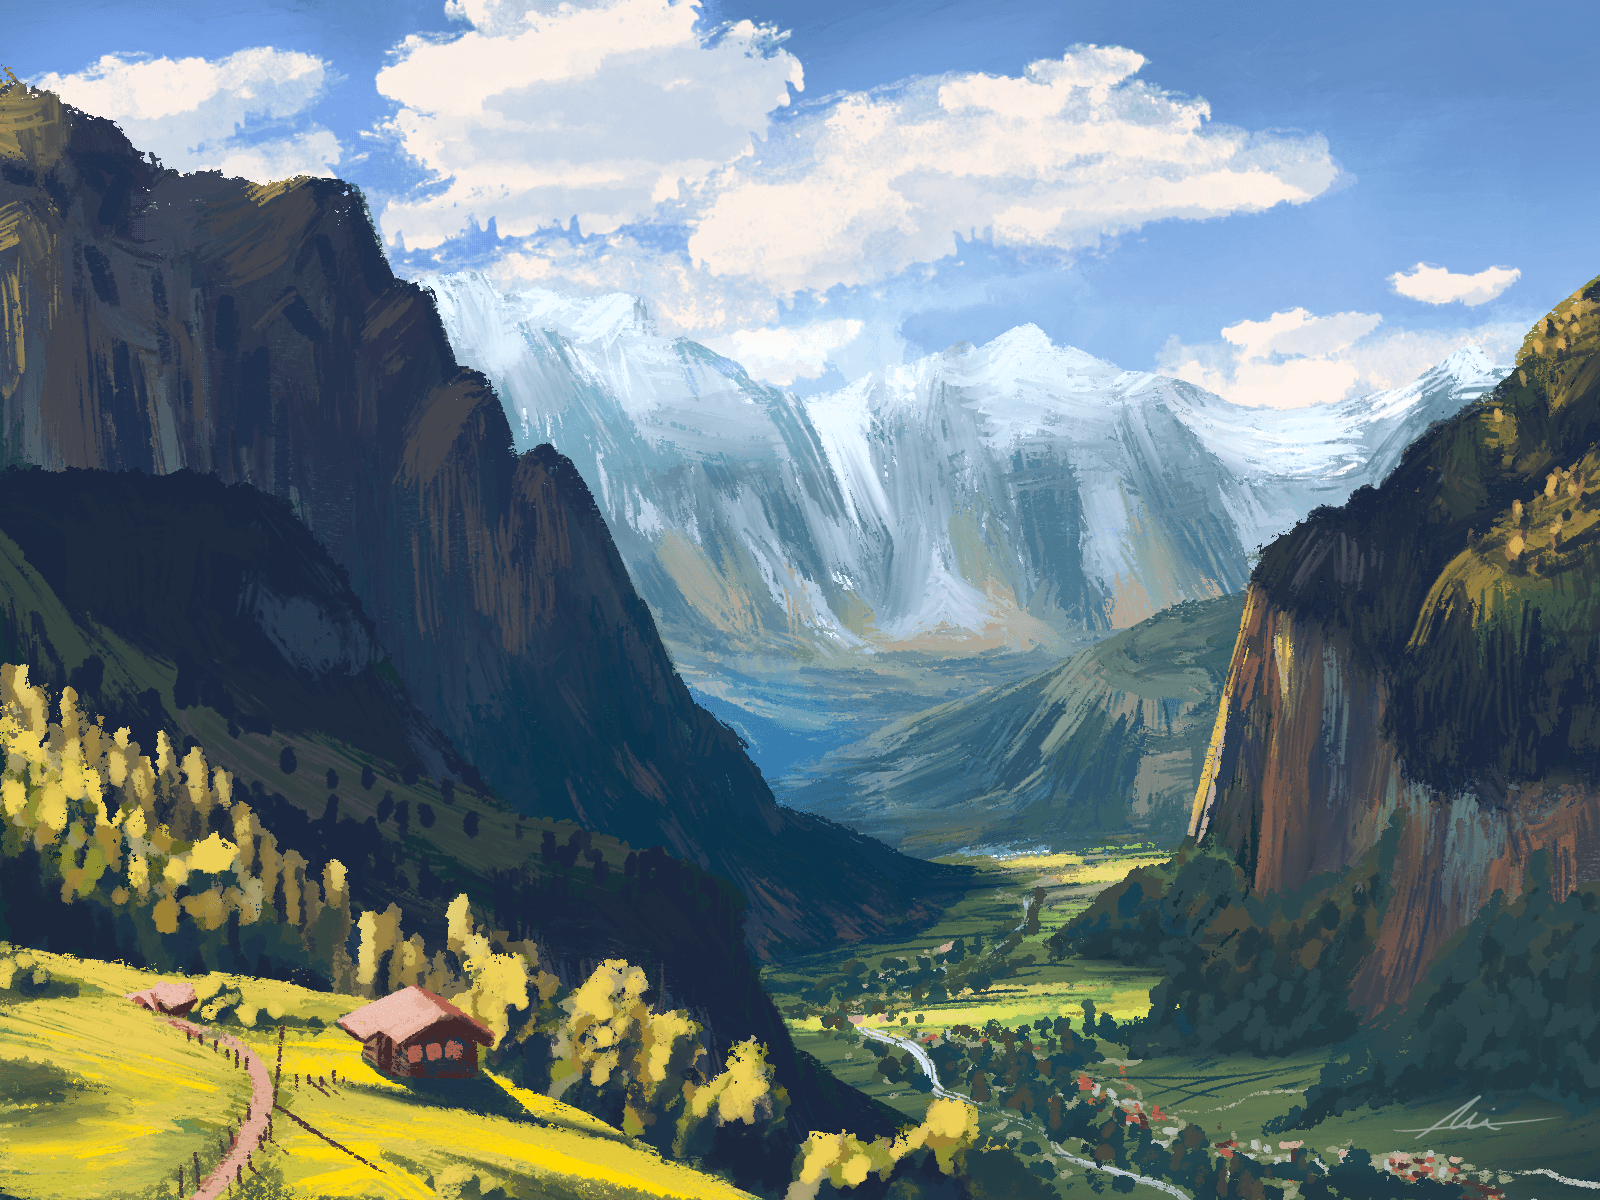 Posttoyou : The valley